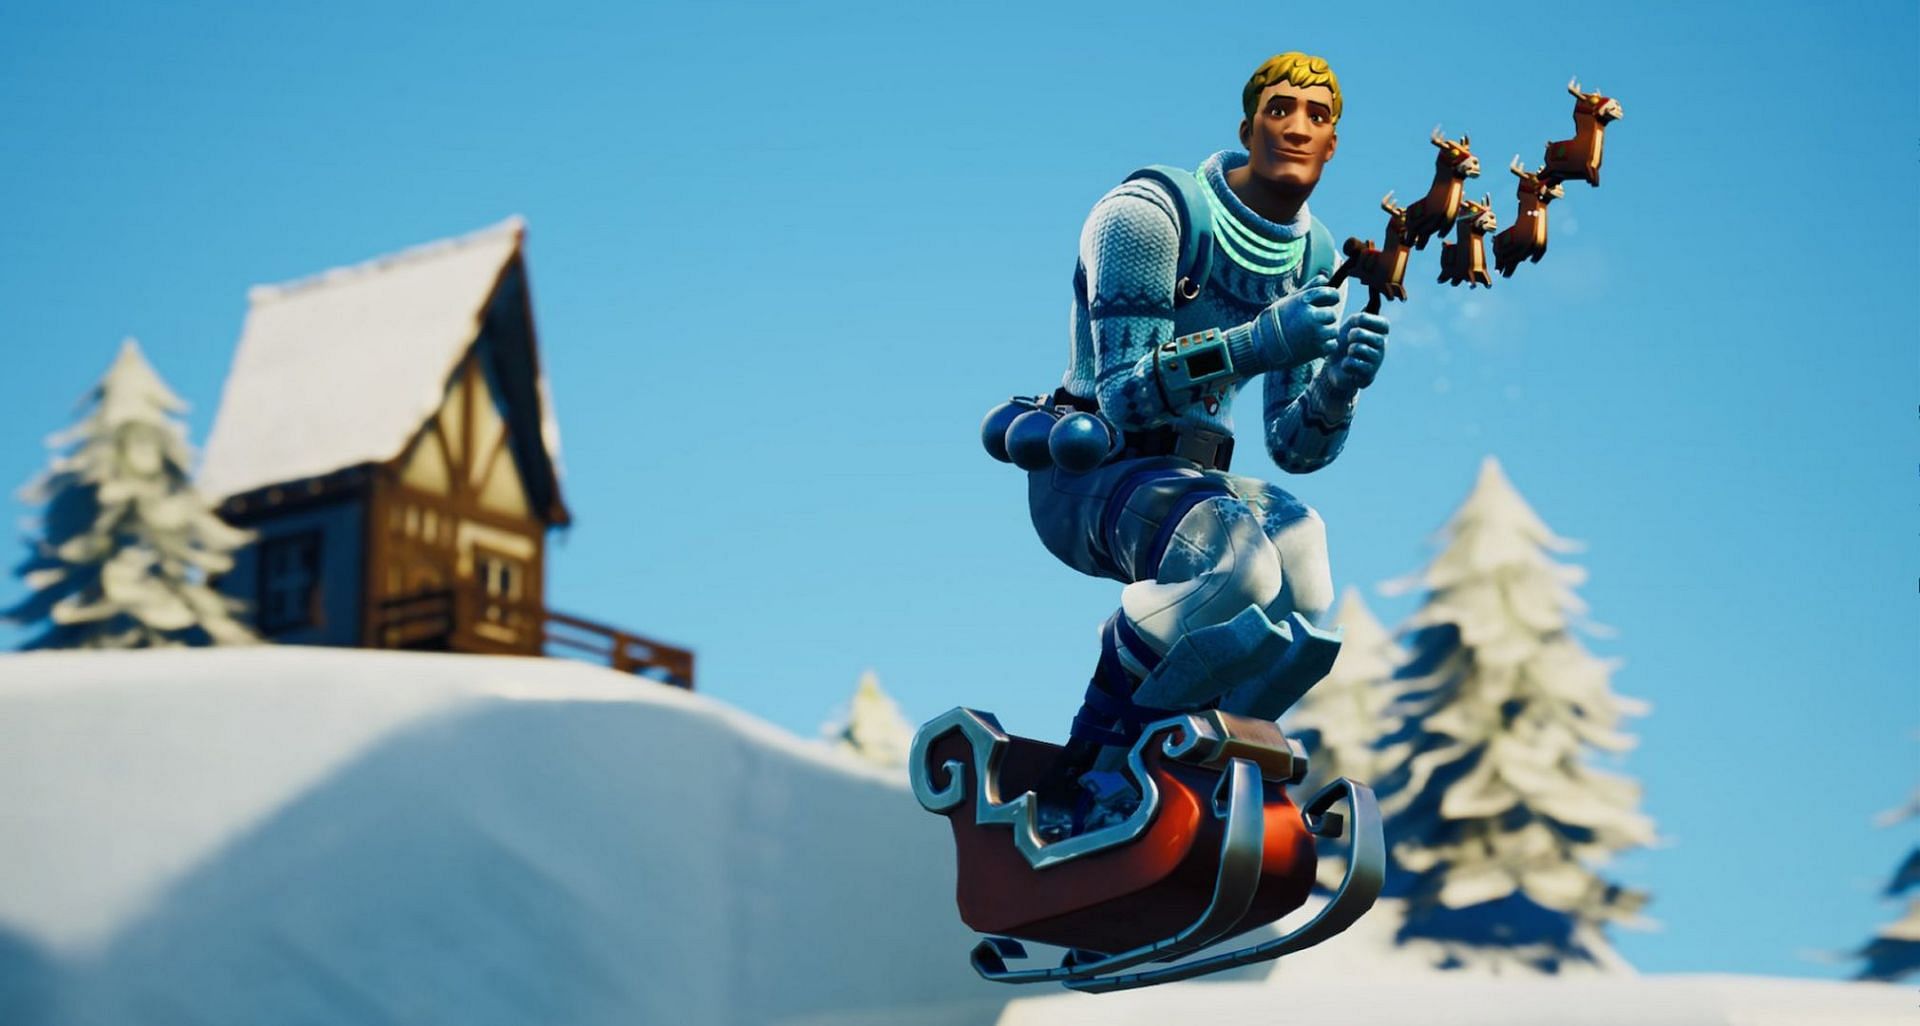 Winter is here to stay for good in Fortnite Chapter 3 (Image via Twitter/KulieHS)